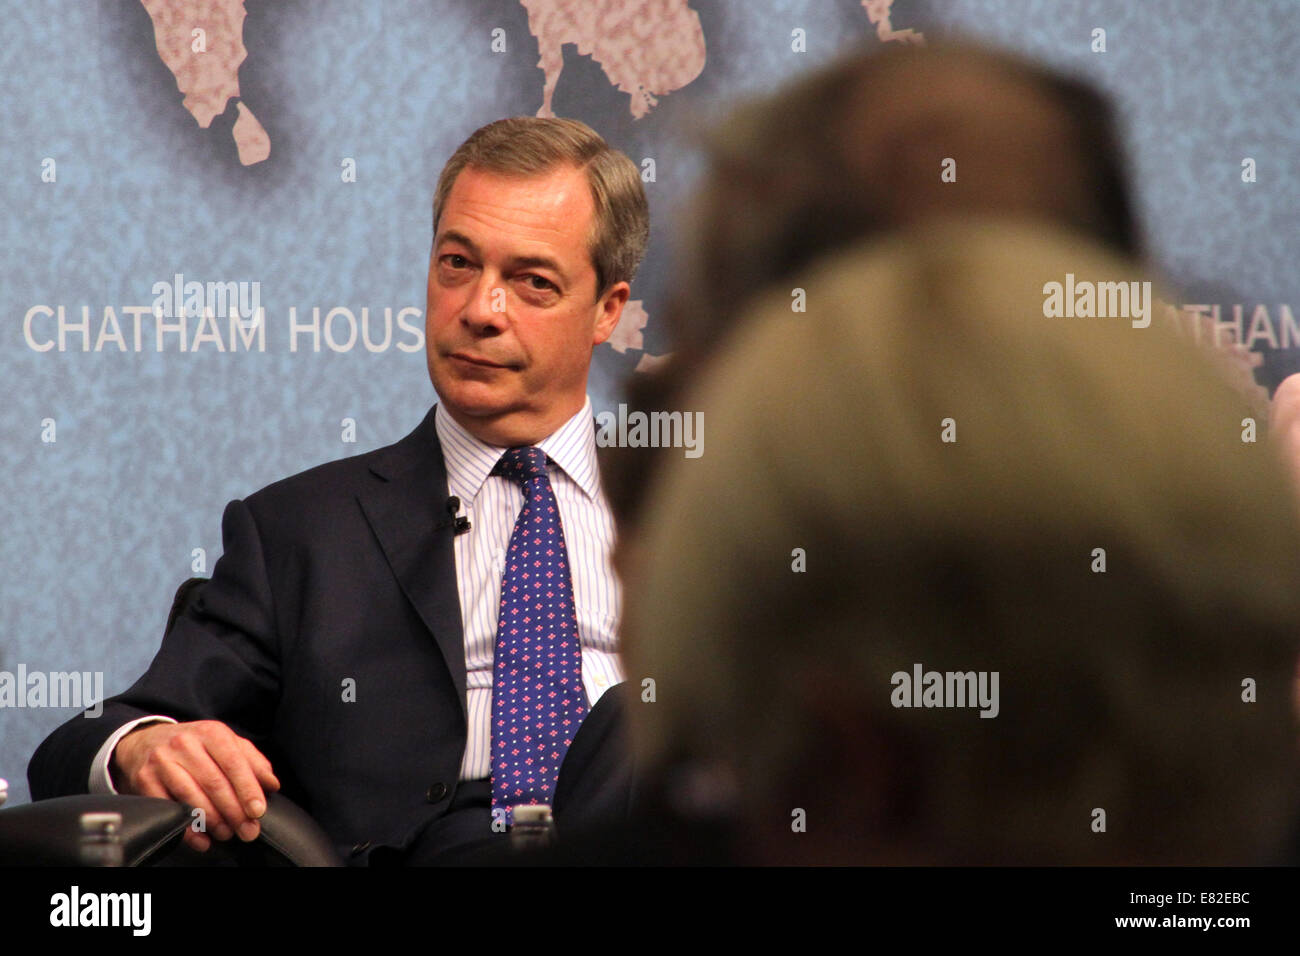 Nigel Farage, leader of the UK Independence Party, speaking at Chatham House in London on Monday 31 March 2014. Stock Photo